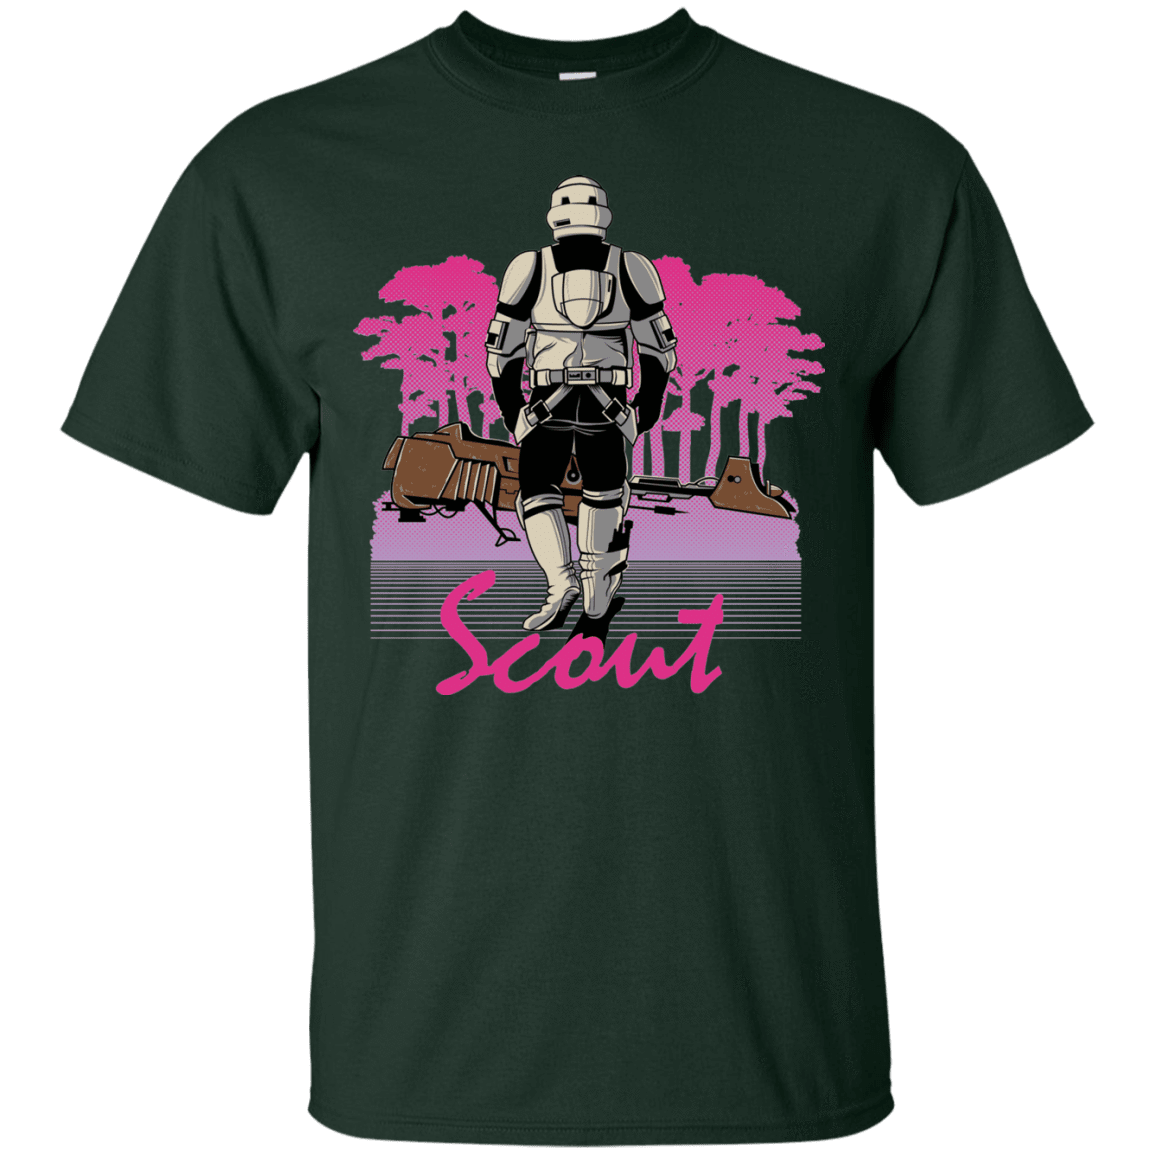 T-Shirts Forest / Small SCOUT DRIVE T-Shirt